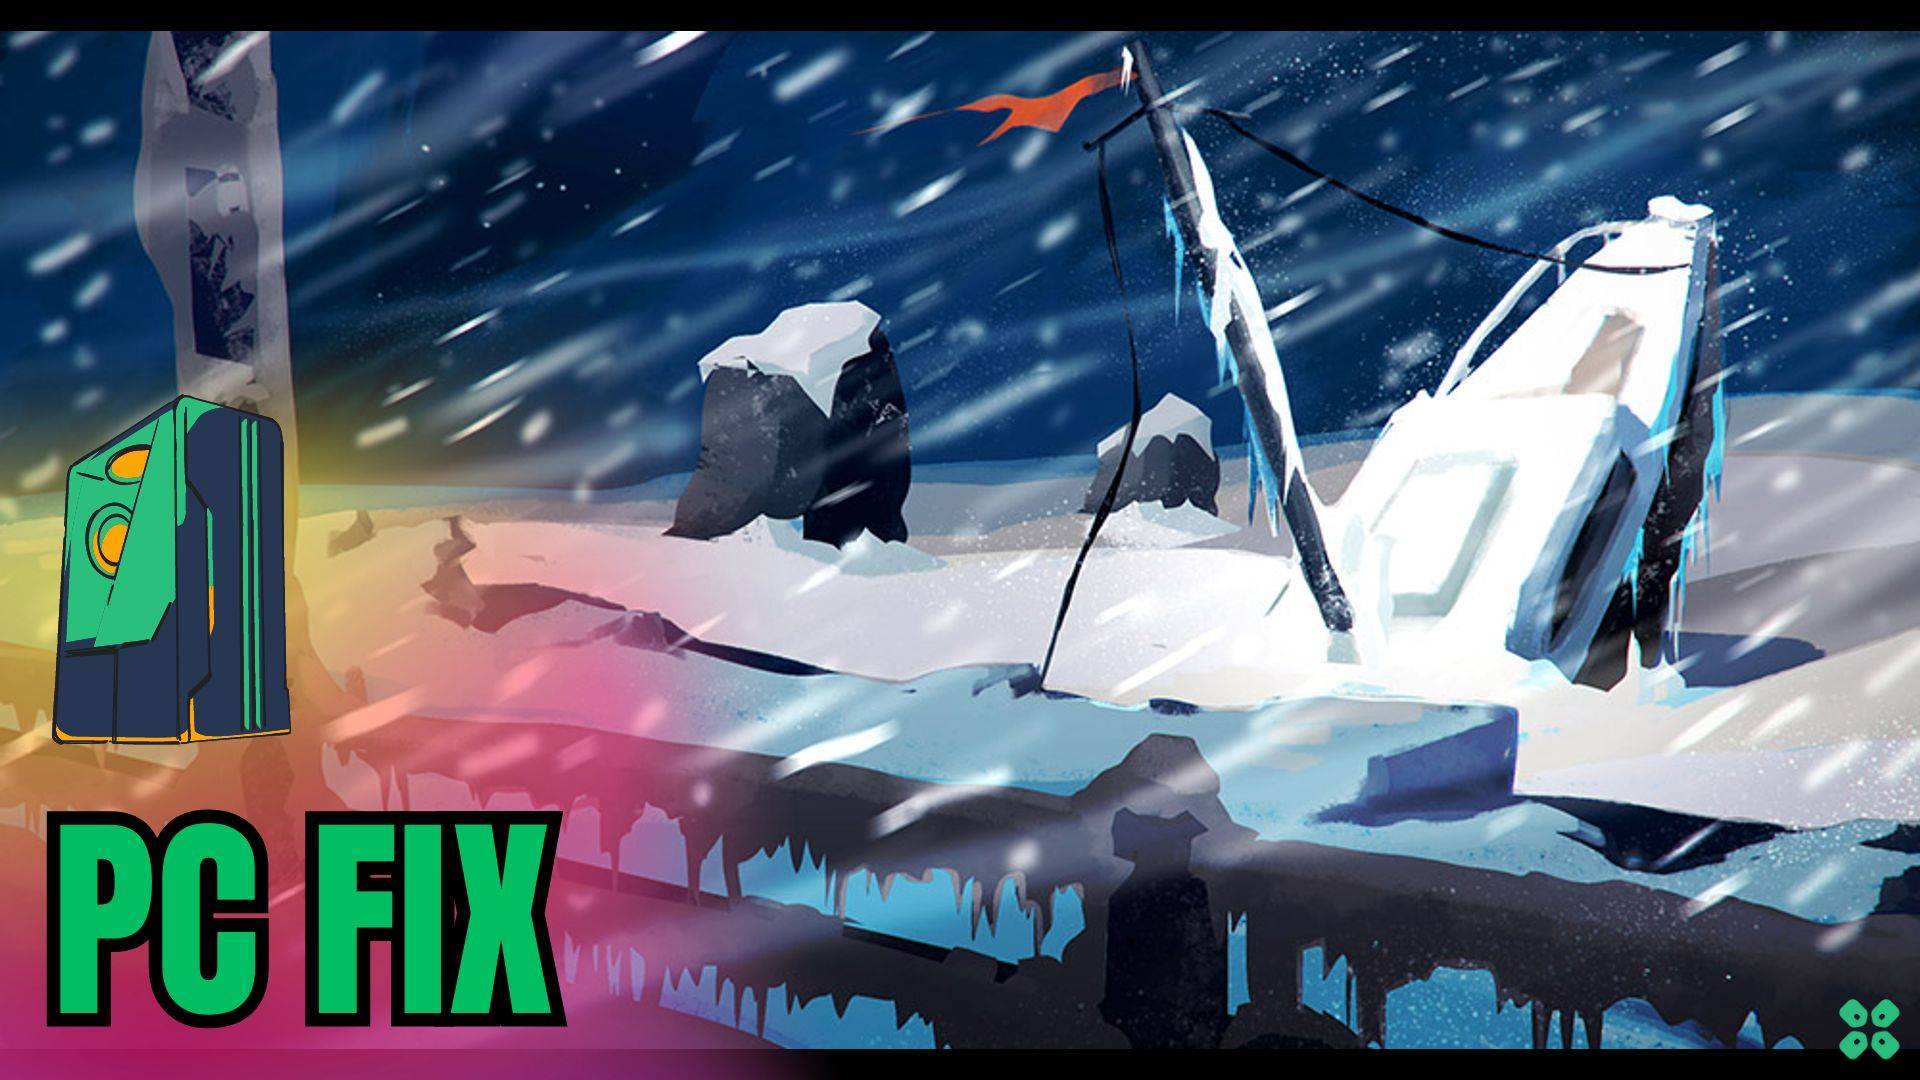 Artwork of The Long Dark and its fix of crashing by TCG